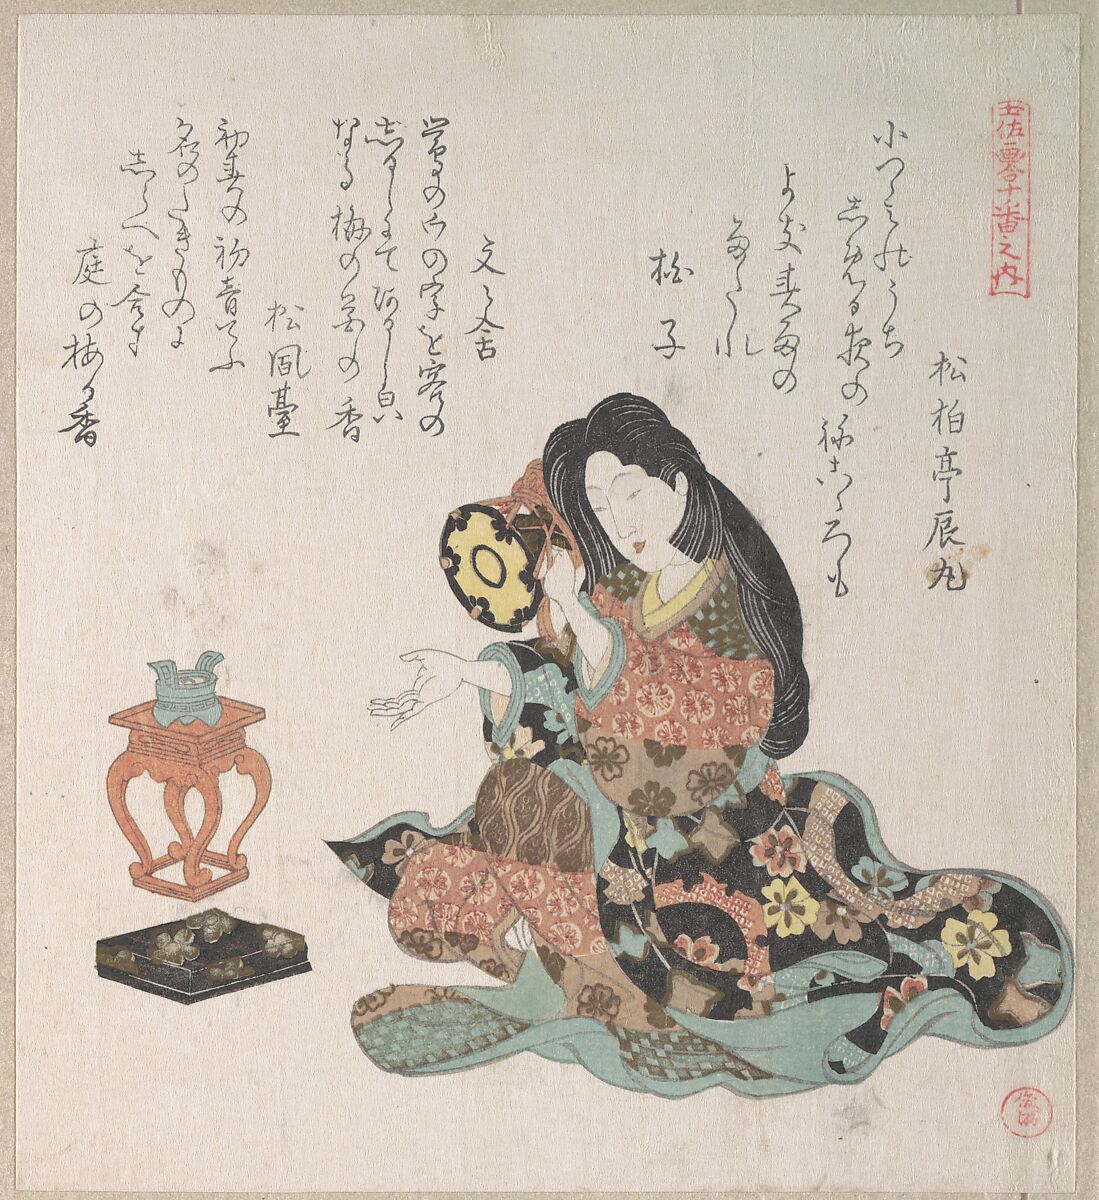 Lady Beating a Hand-Drum (Tzusumi) By the Side of The Incense Burner, Kubo Shunman (Japanese, 1757–1820), Part of an album of woodblock prints (surimono); ink and color on paper, Japan 